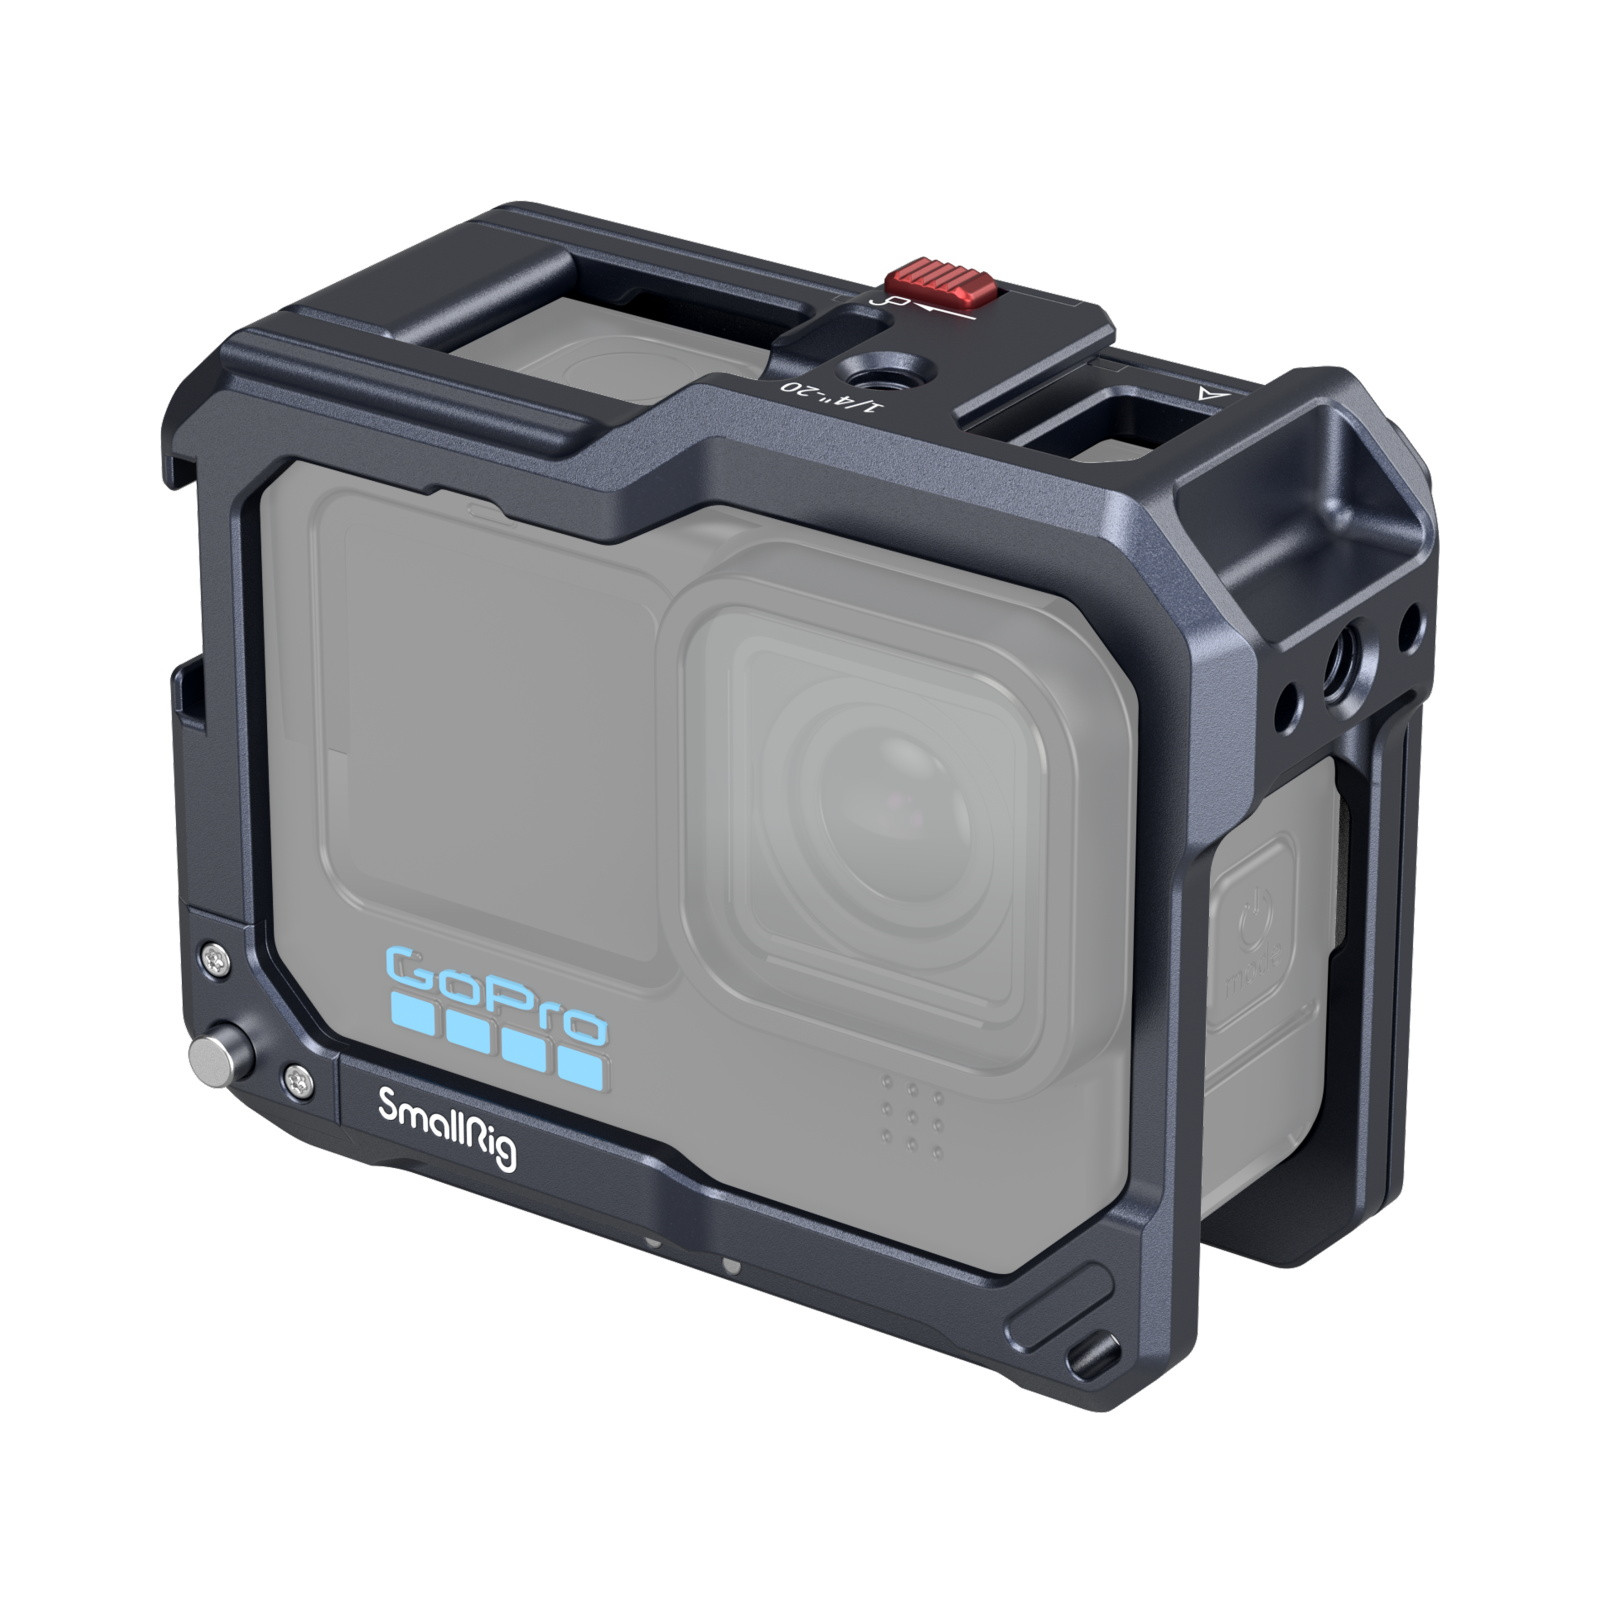 GoPro Hero12 Black Review: This tiny action camera provides a